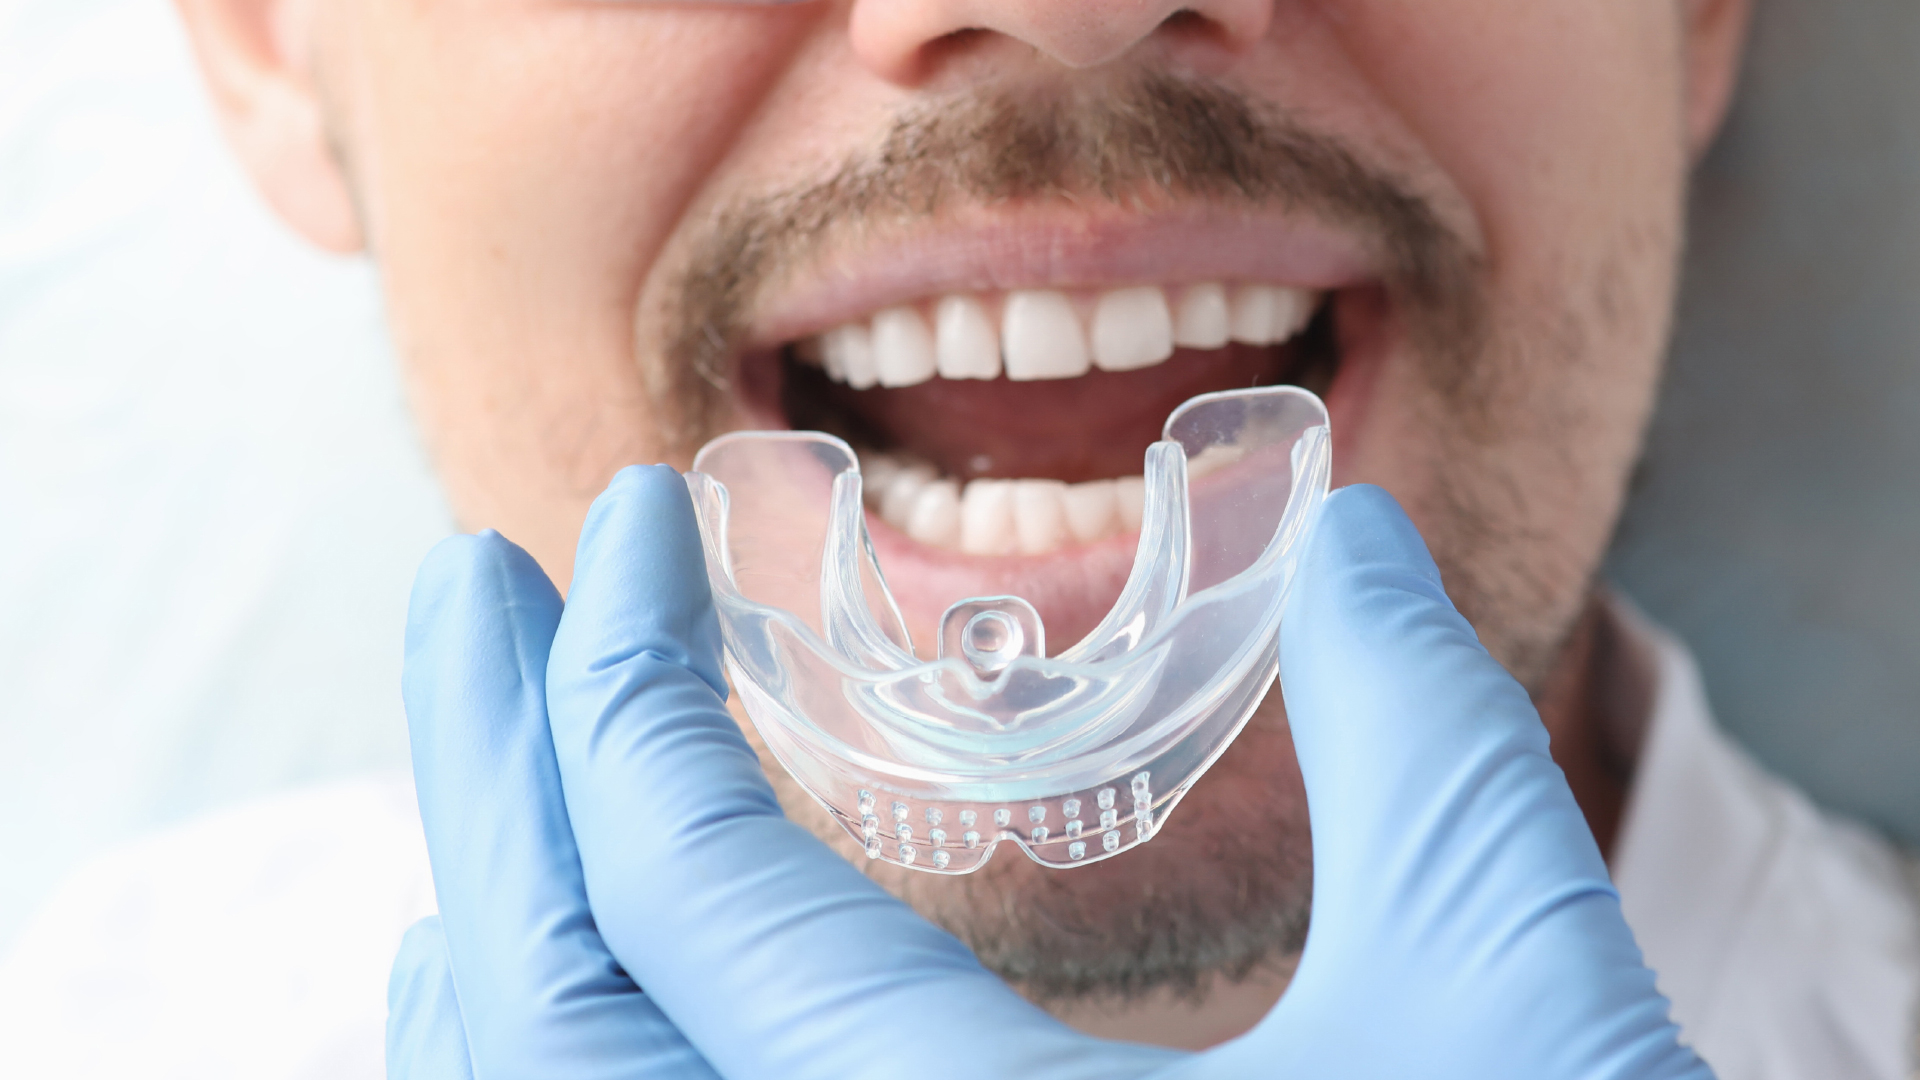 A tool helping patient with bruxism